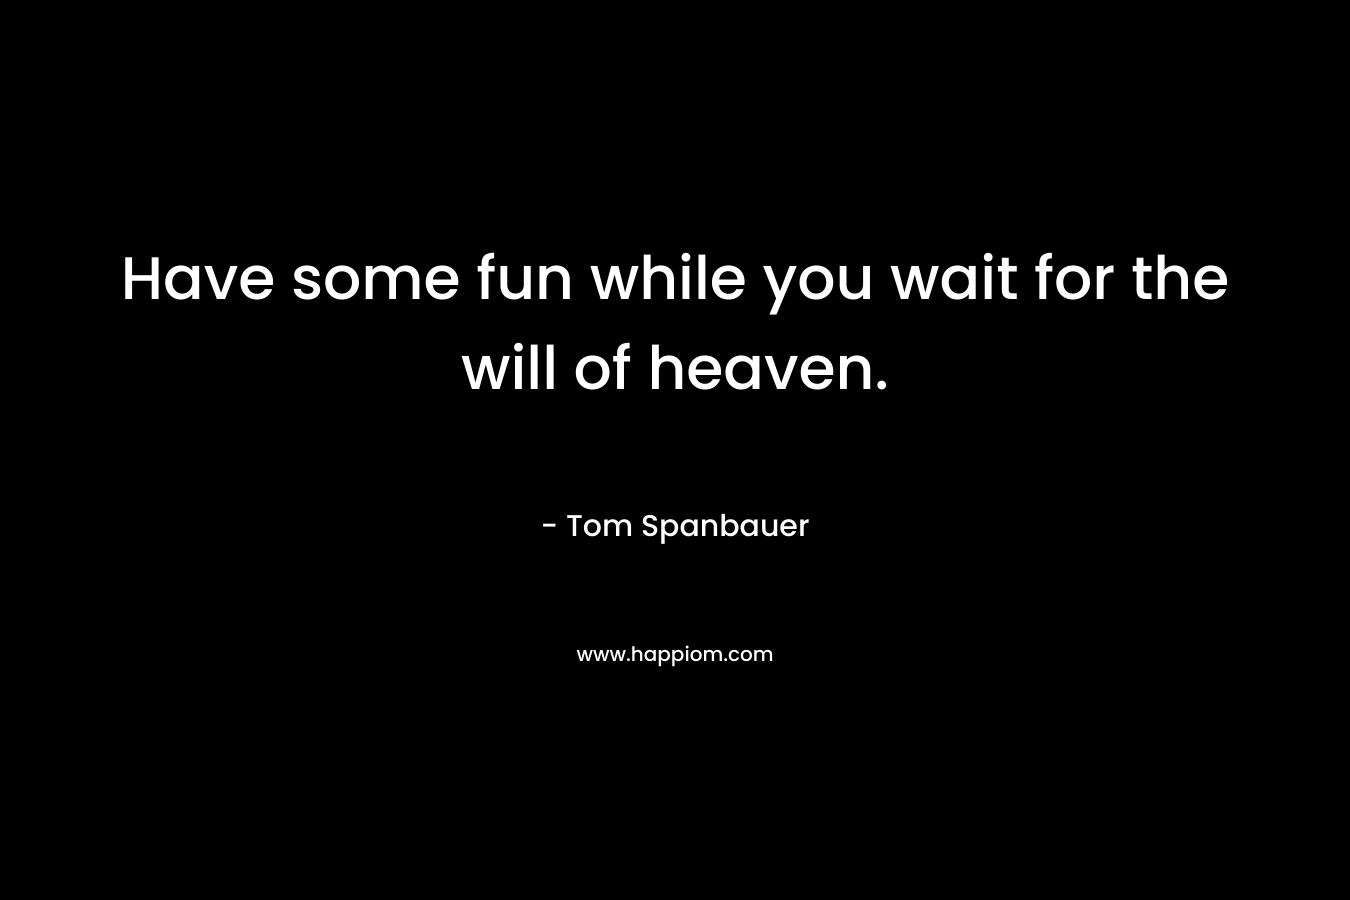 Have some fun while you wait for the will of heaven. – Tom Spanbauer